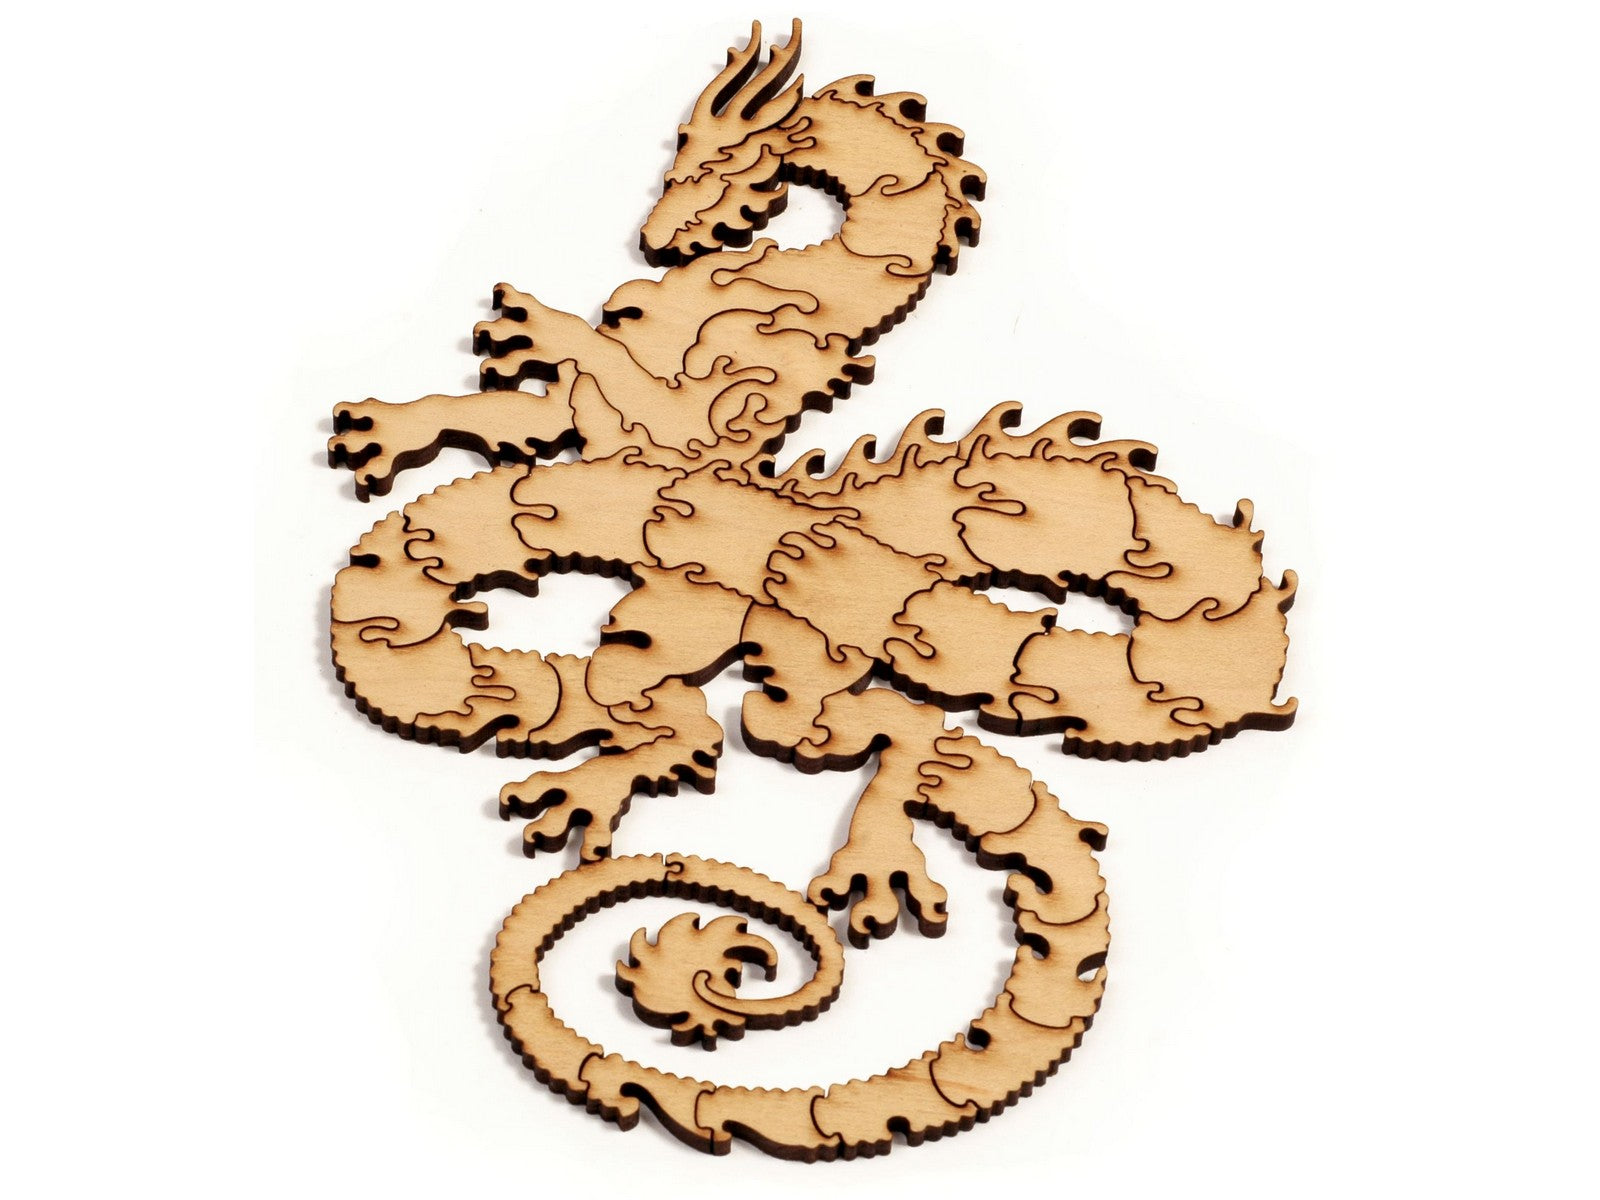 A closeup of pieces in the shape of a dragon.